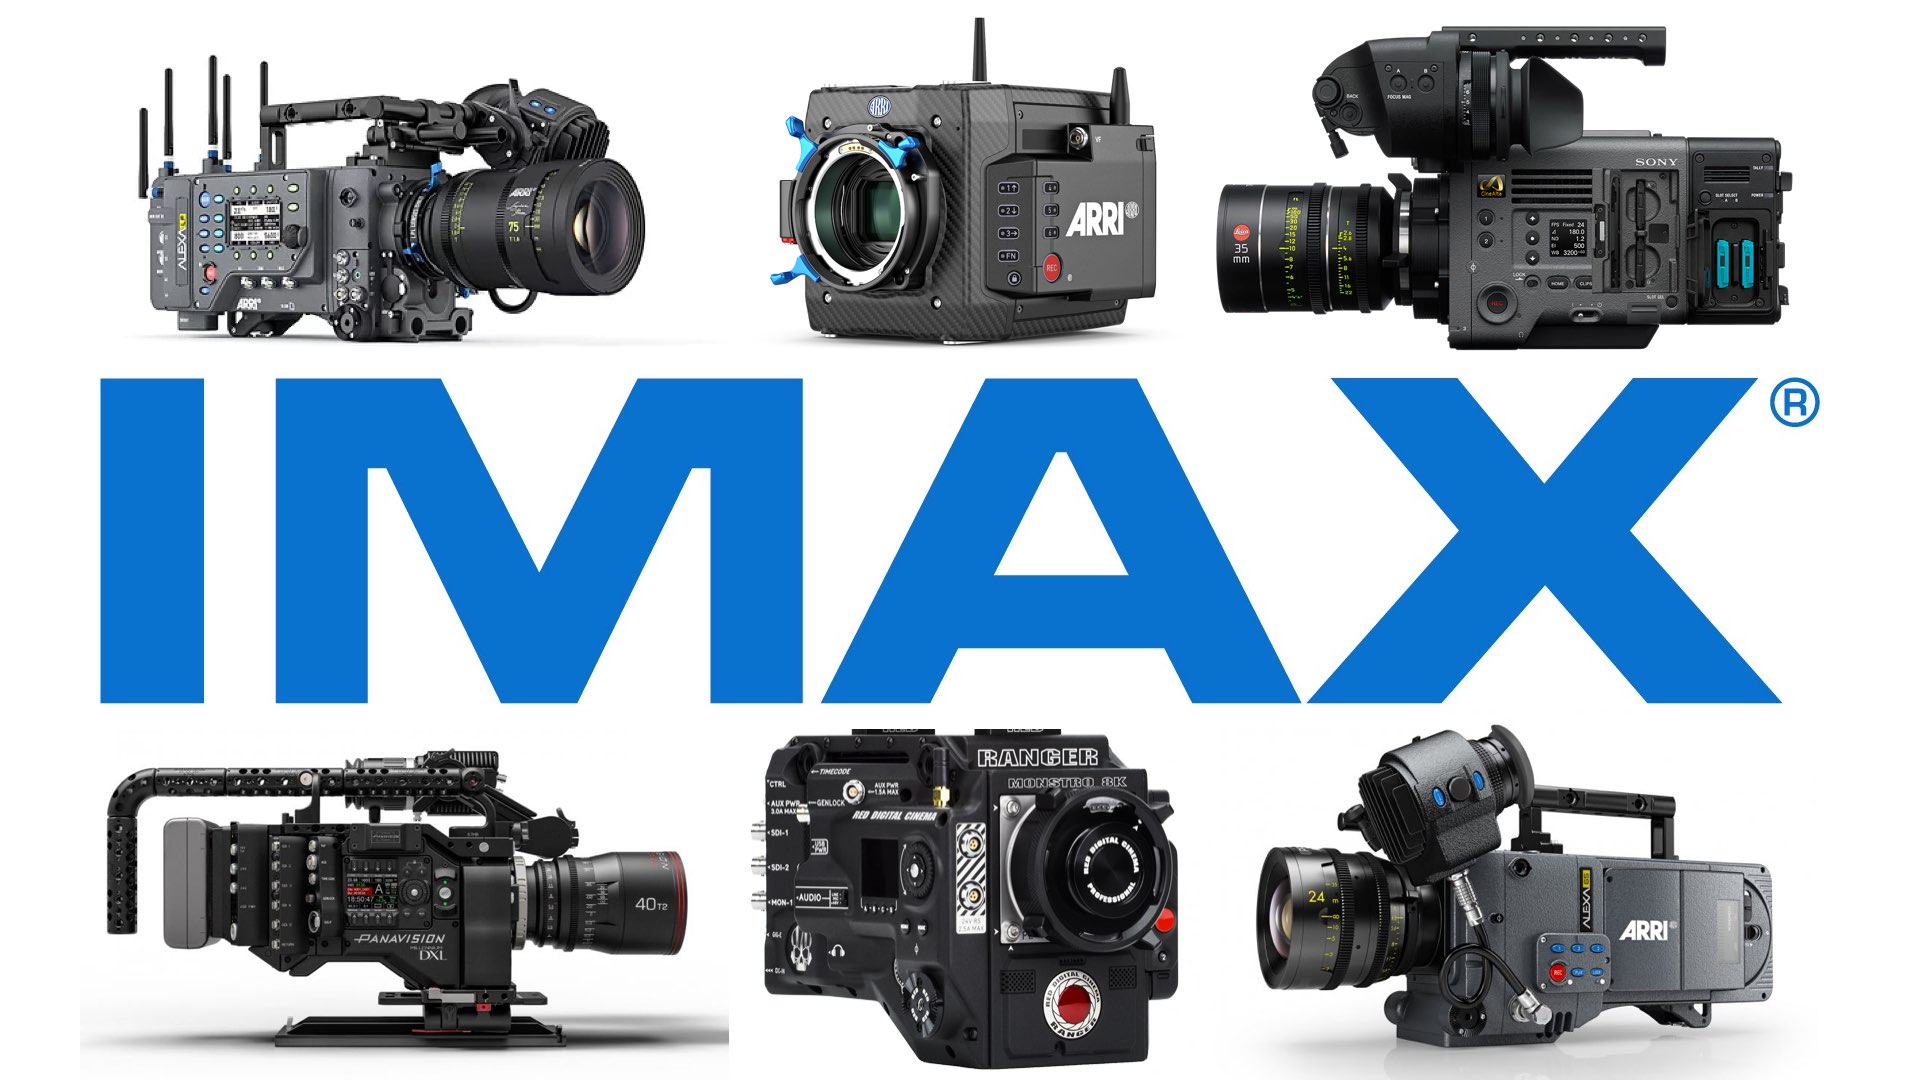 bede damper serviet IMAX Launches "Filmed In IMAX" Program - Welcomes ARRI, RED, Panavision,  and Sony - YMCinema - News & Insights on Digital Cinema